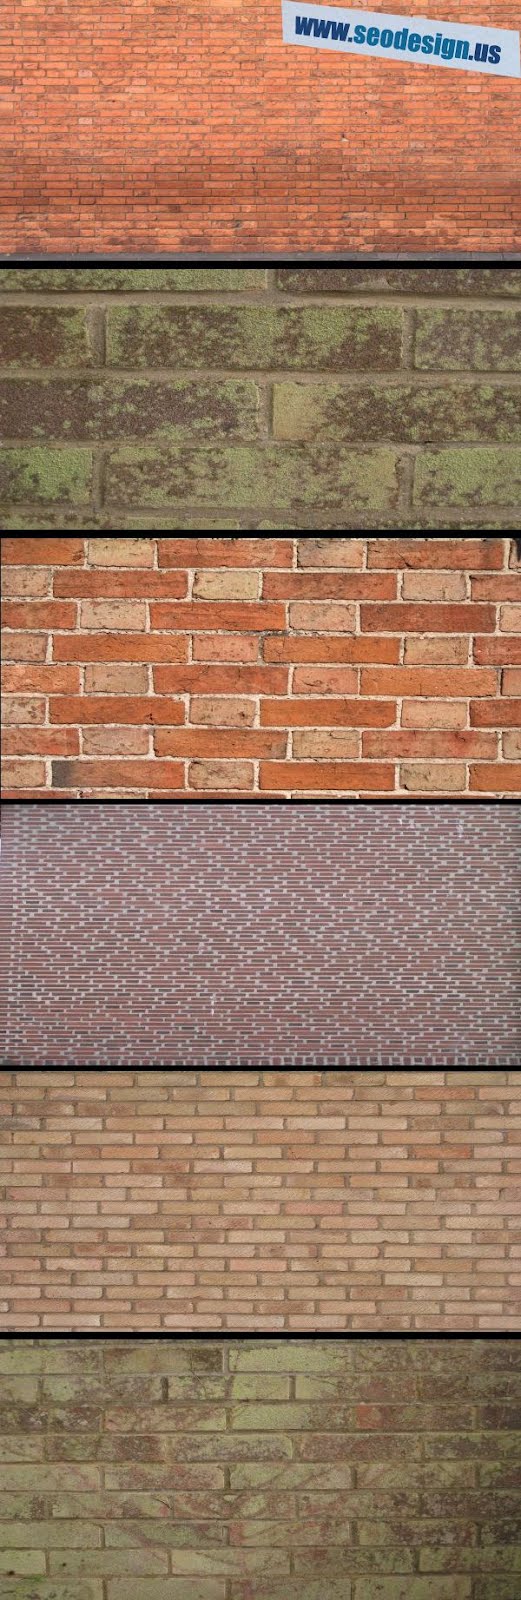 32 Free Brick Wall Background Textures Pack